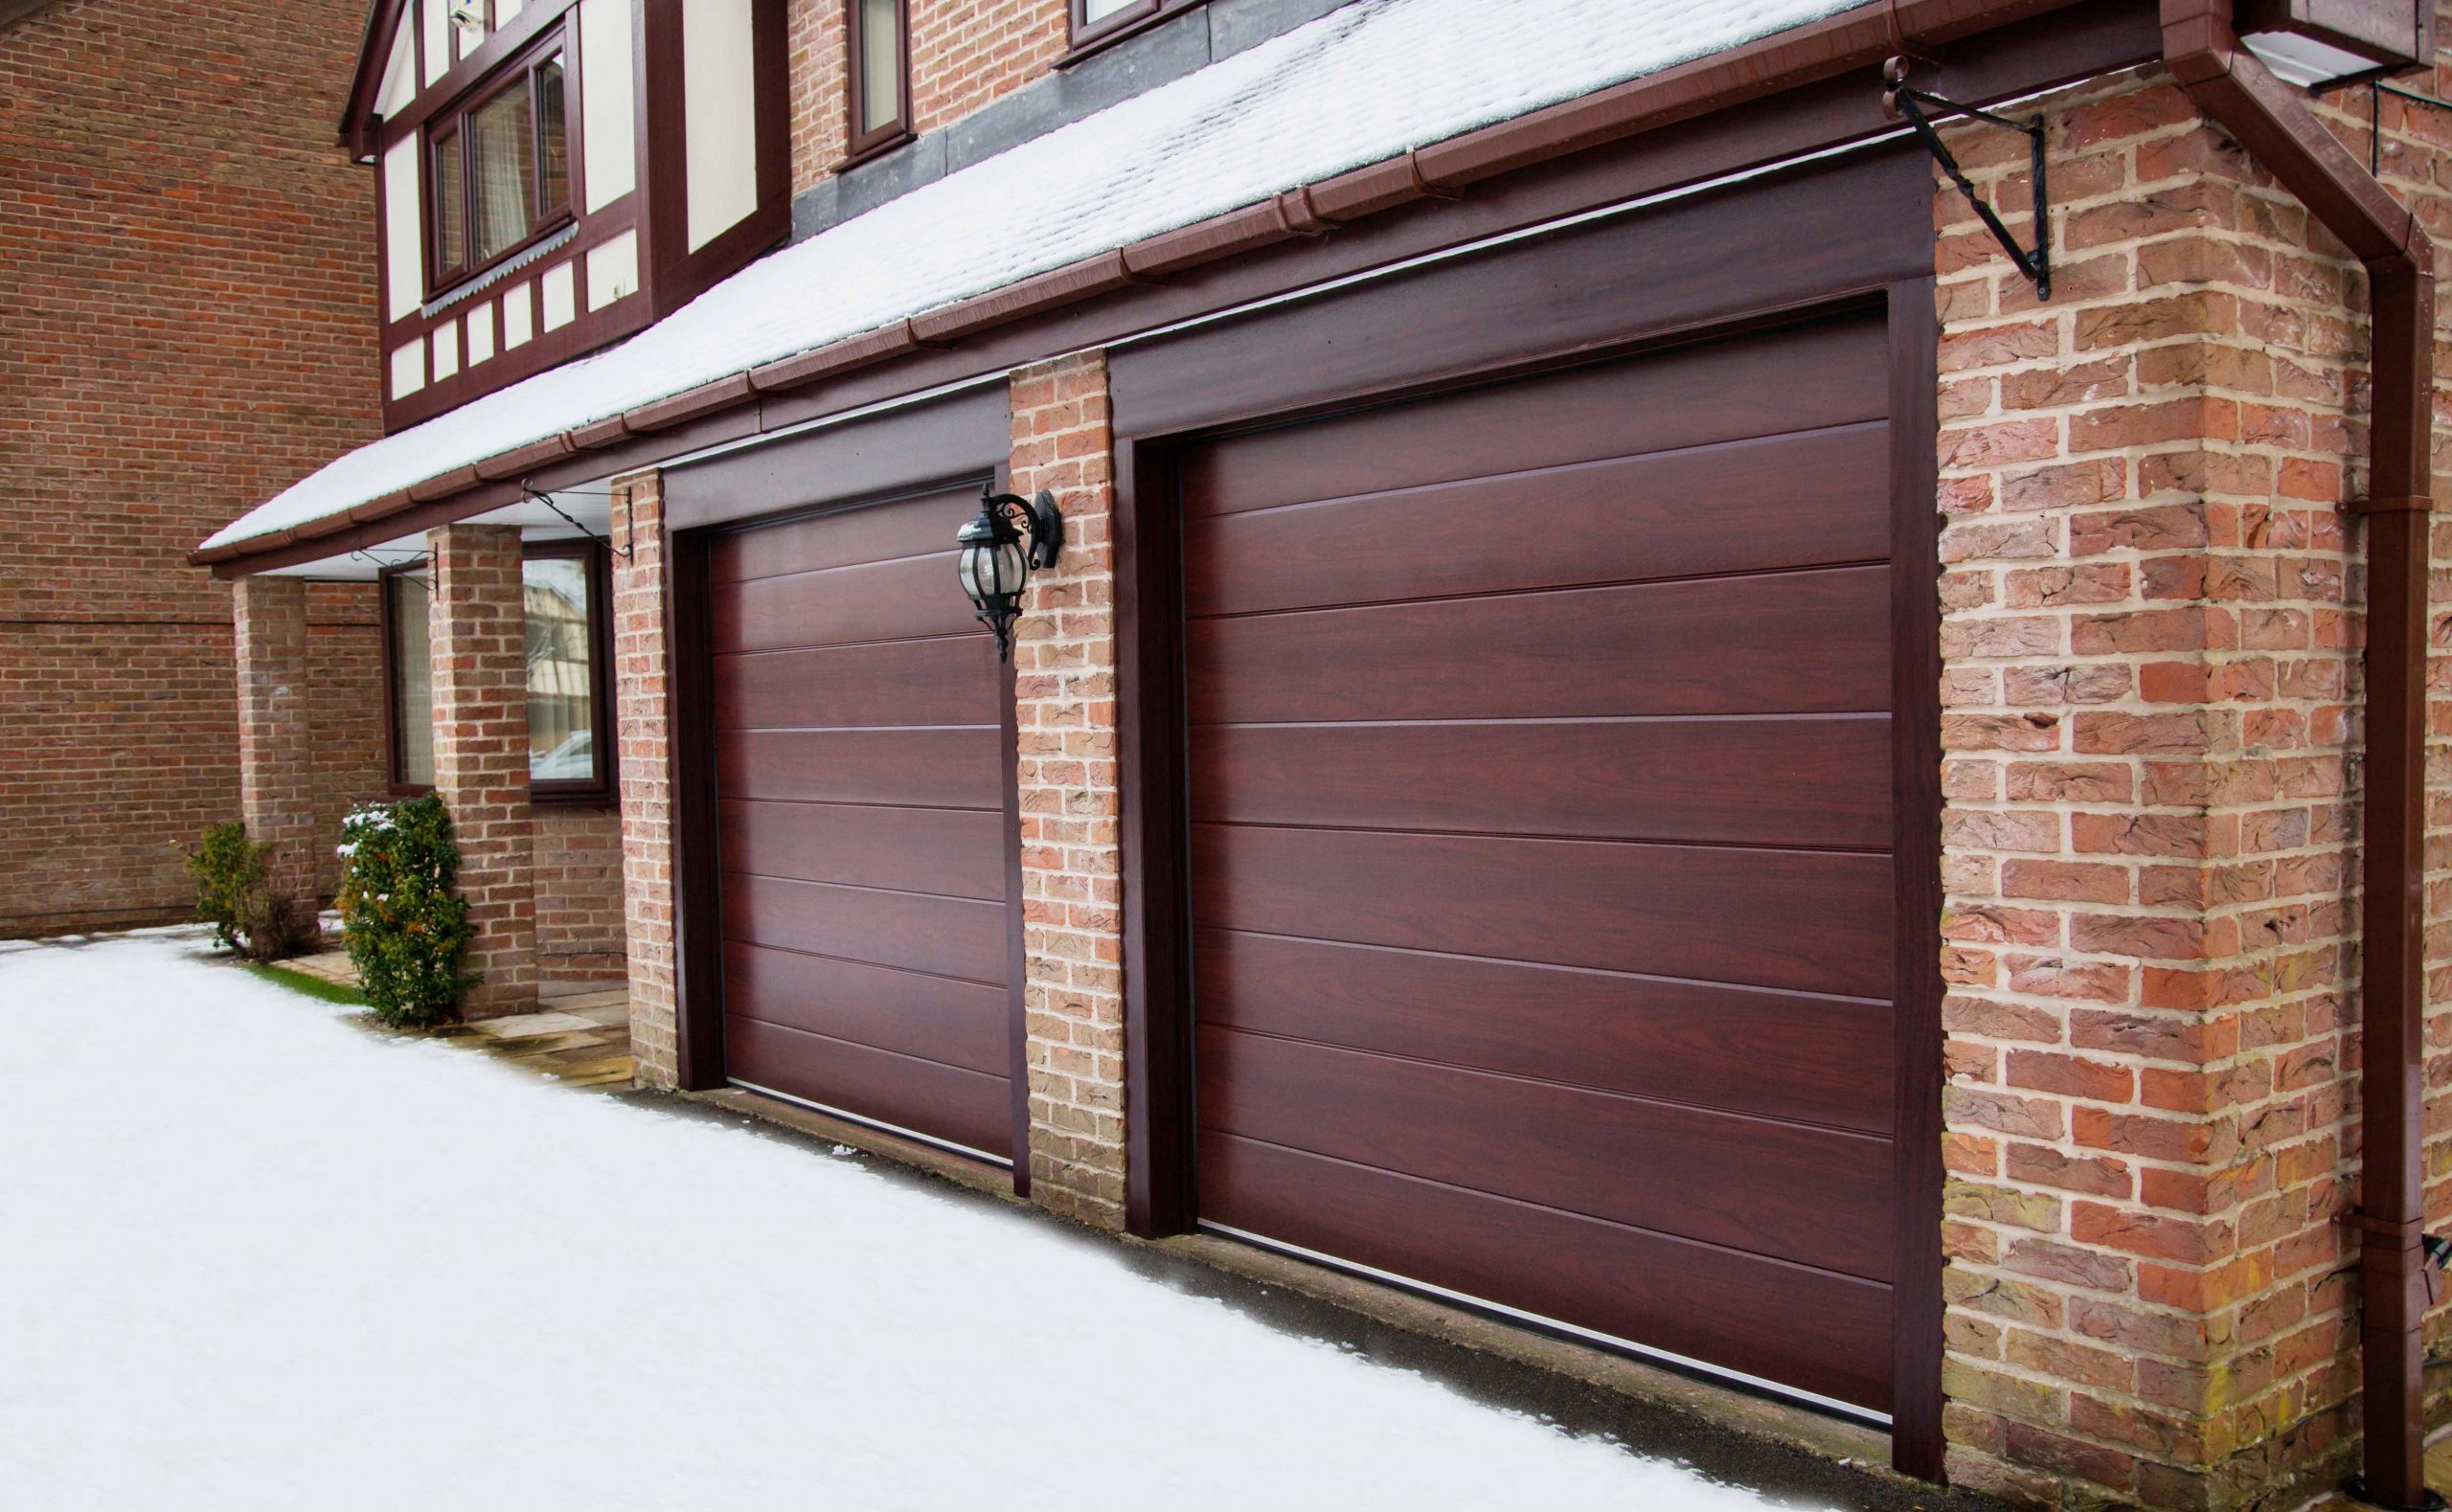 Best How Much Does It Cost To Have A New Garage Door Installed for Small Space